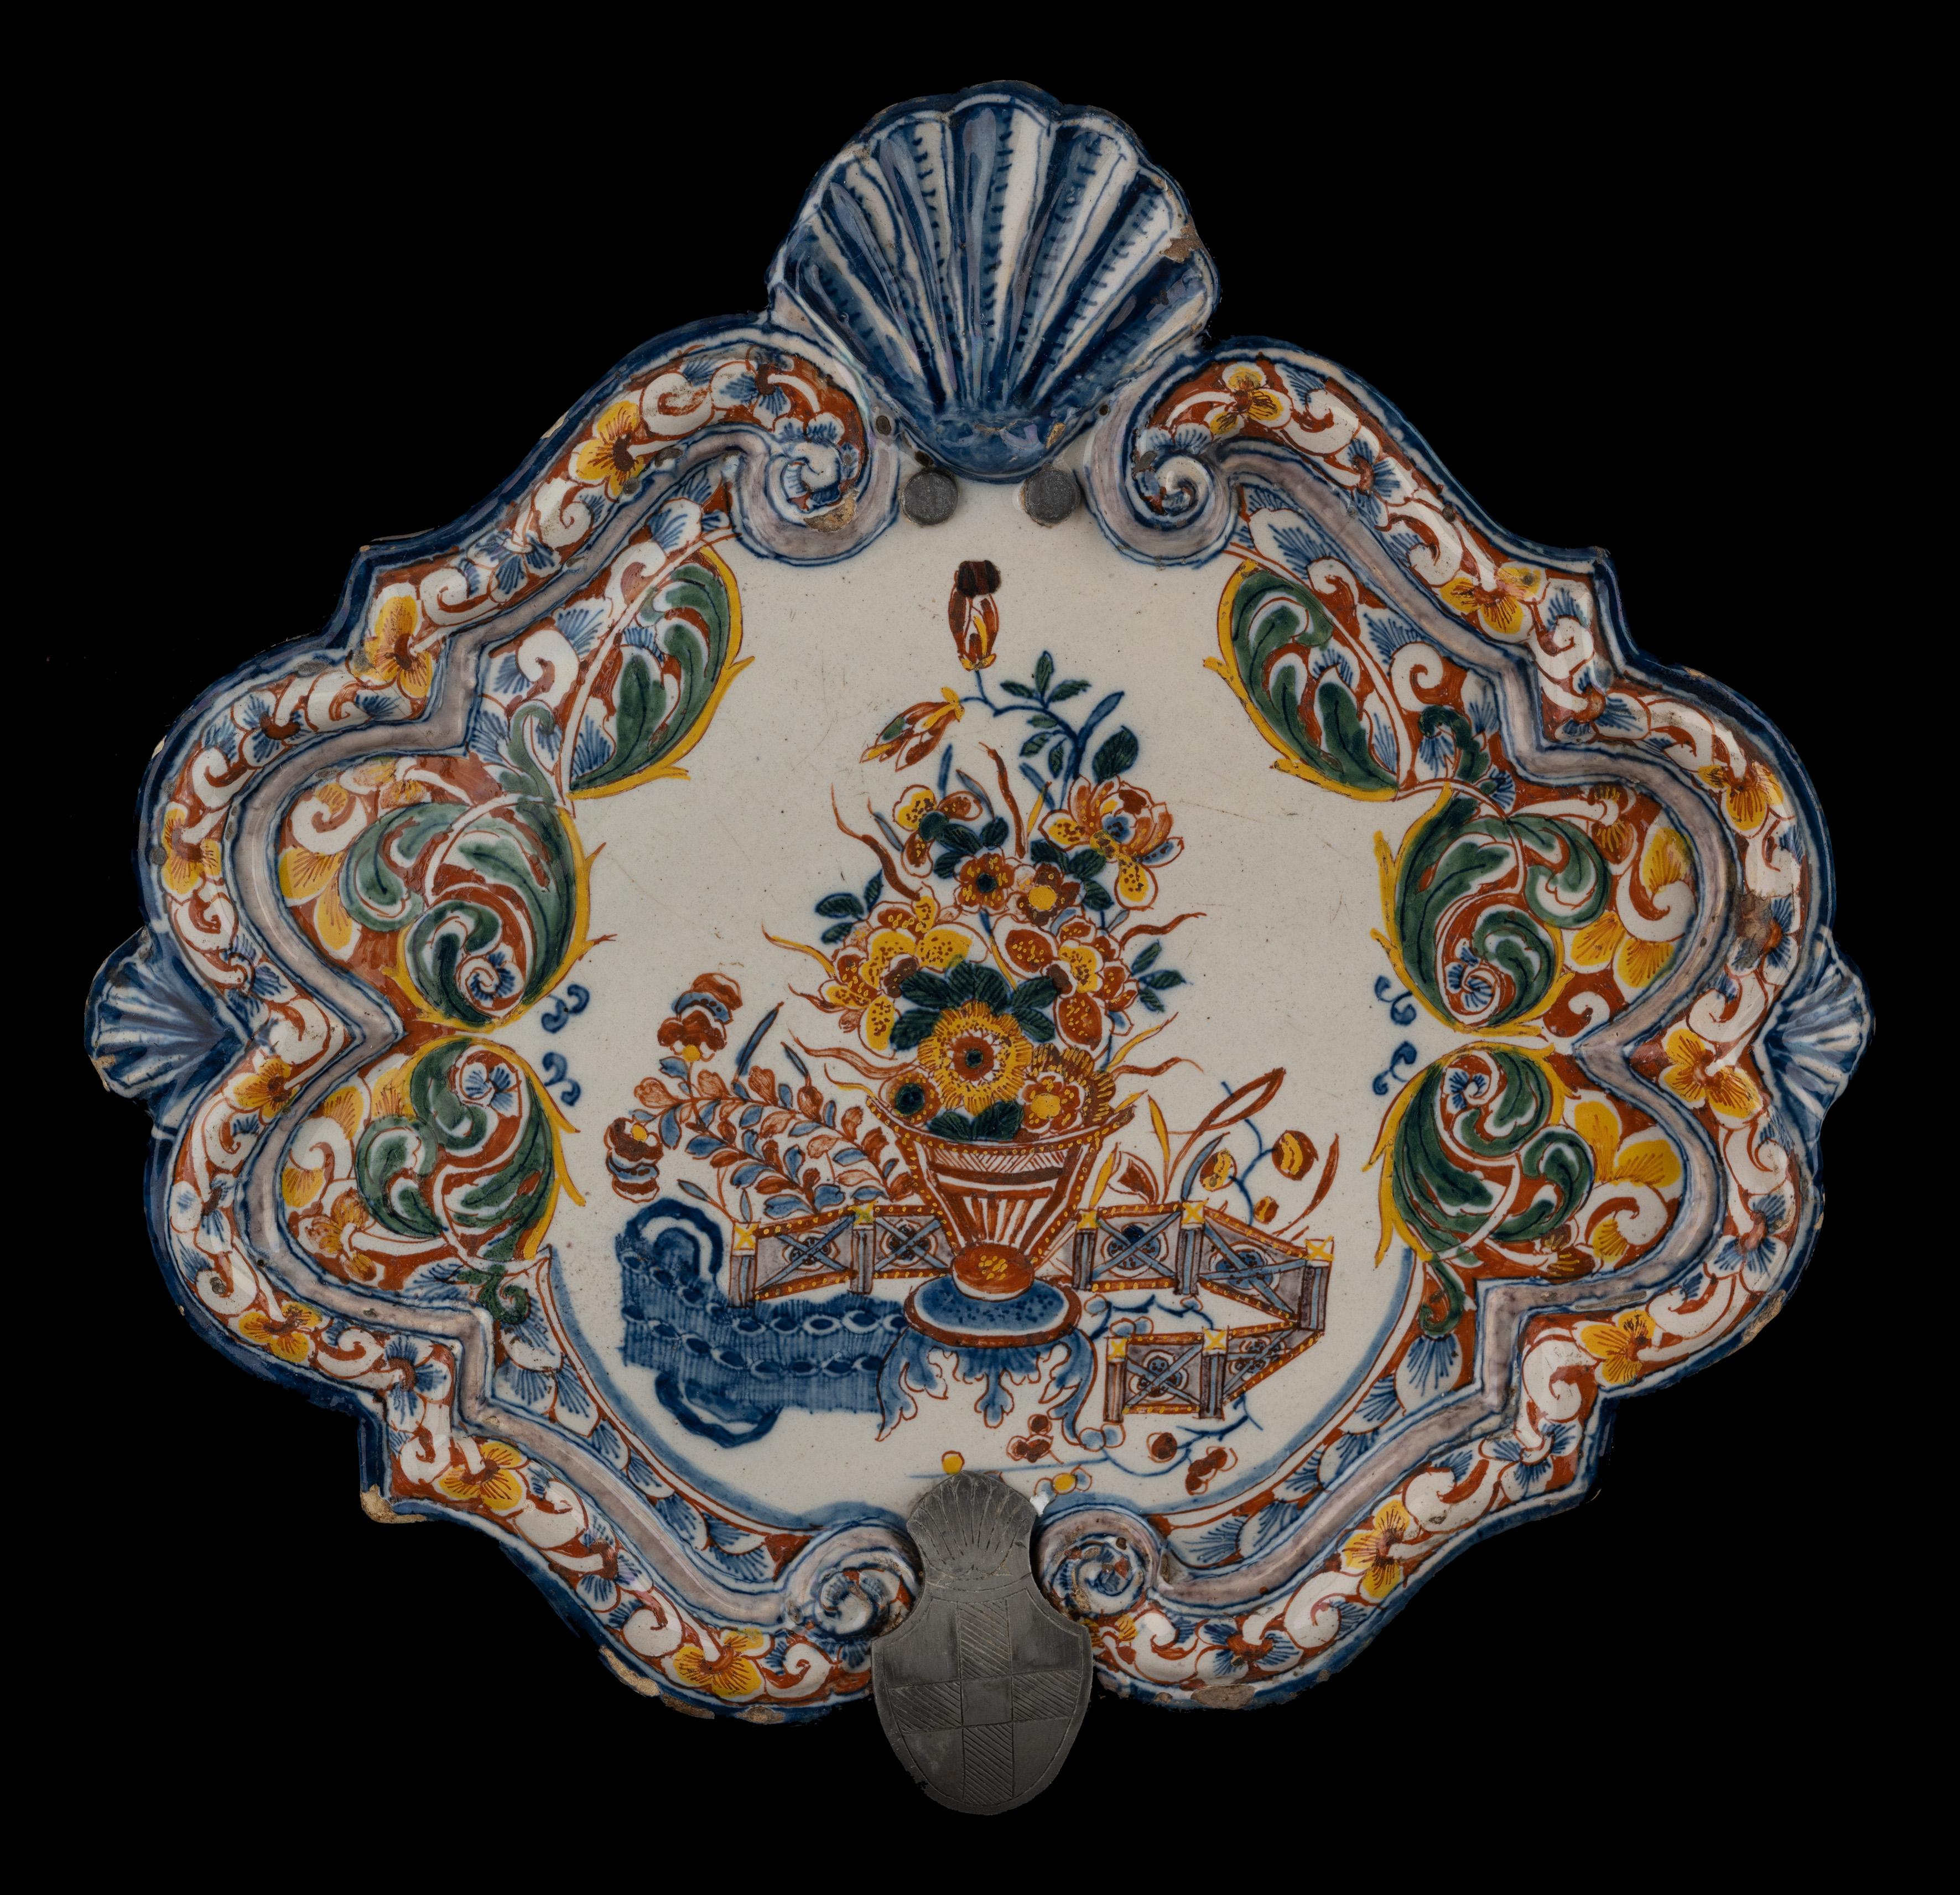 Polychrome plaque with a flower vase. Delft, 1740-1760

The lozenge-shaped plaque has a raised, accolade-shaped rim interrupted at the top by a large shell and at the bottom by a smaller shell. A shell is also modelled on both sides. The plaque is